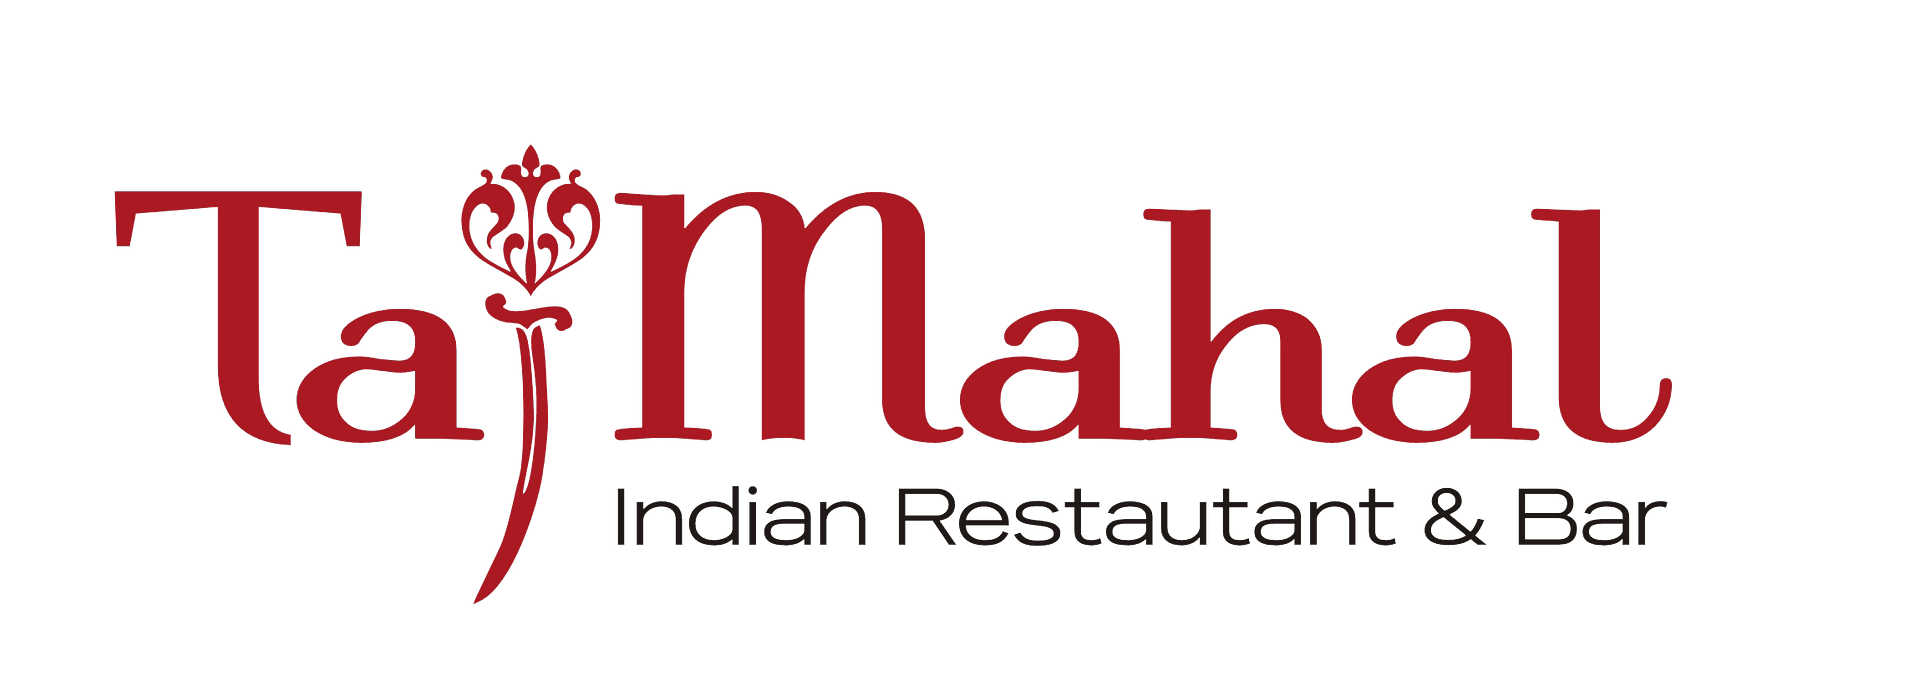 Taj Mahal - Here is our Menu, we will soon have our